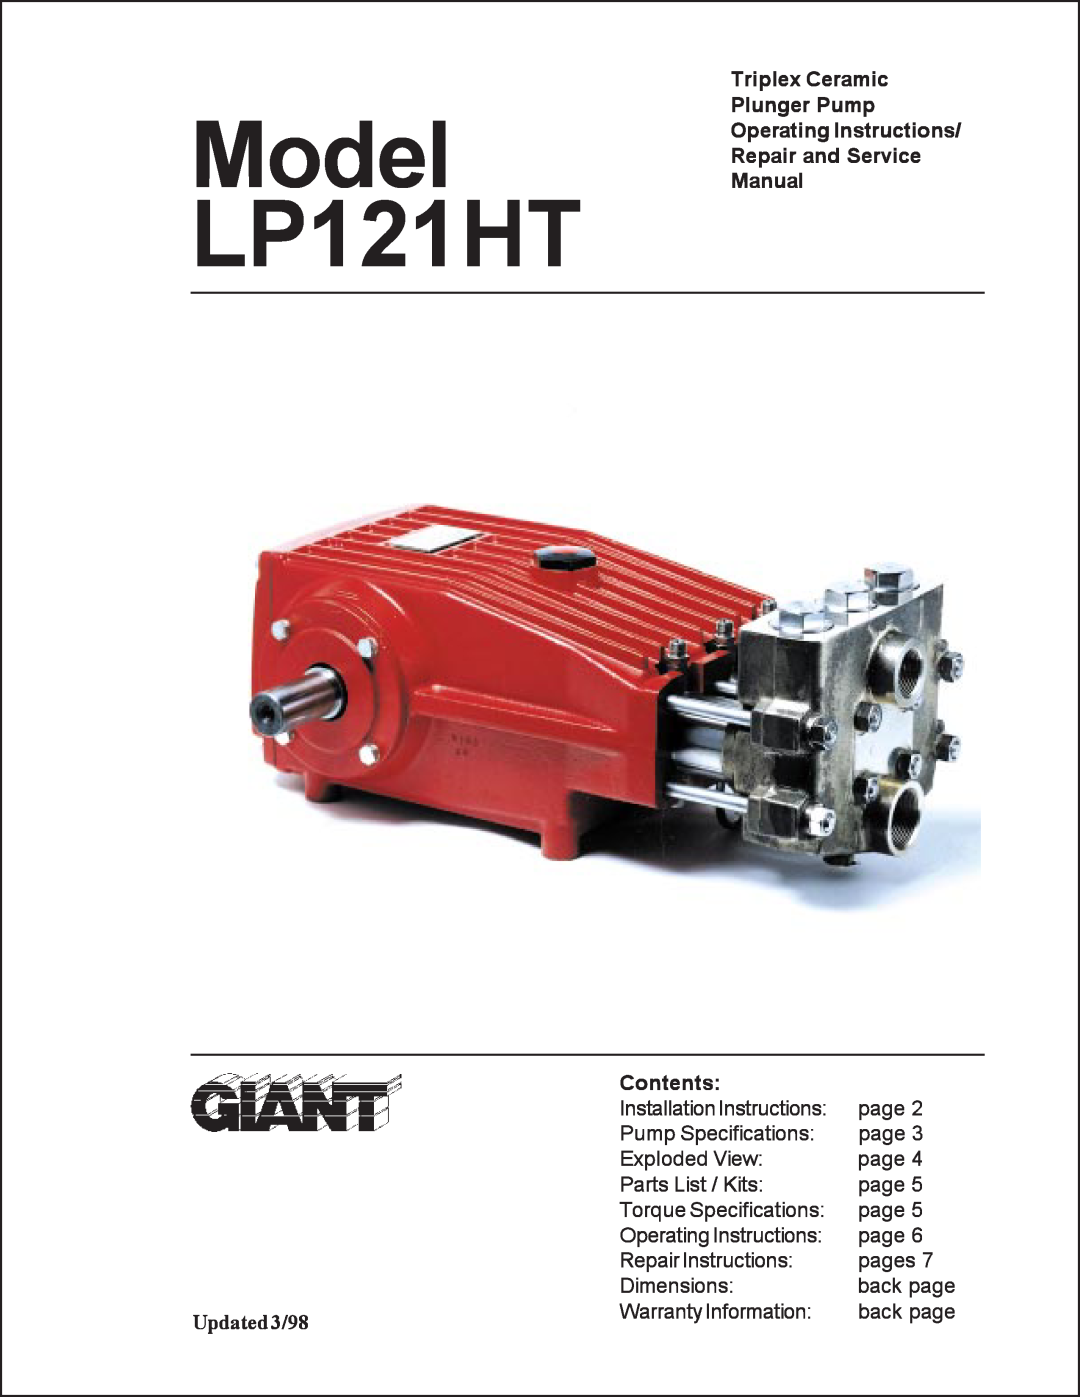 Giant LP121HT installation instructions Triplex Ceramic Plunger Pump Operating Instructions, Repair and Service Manual 